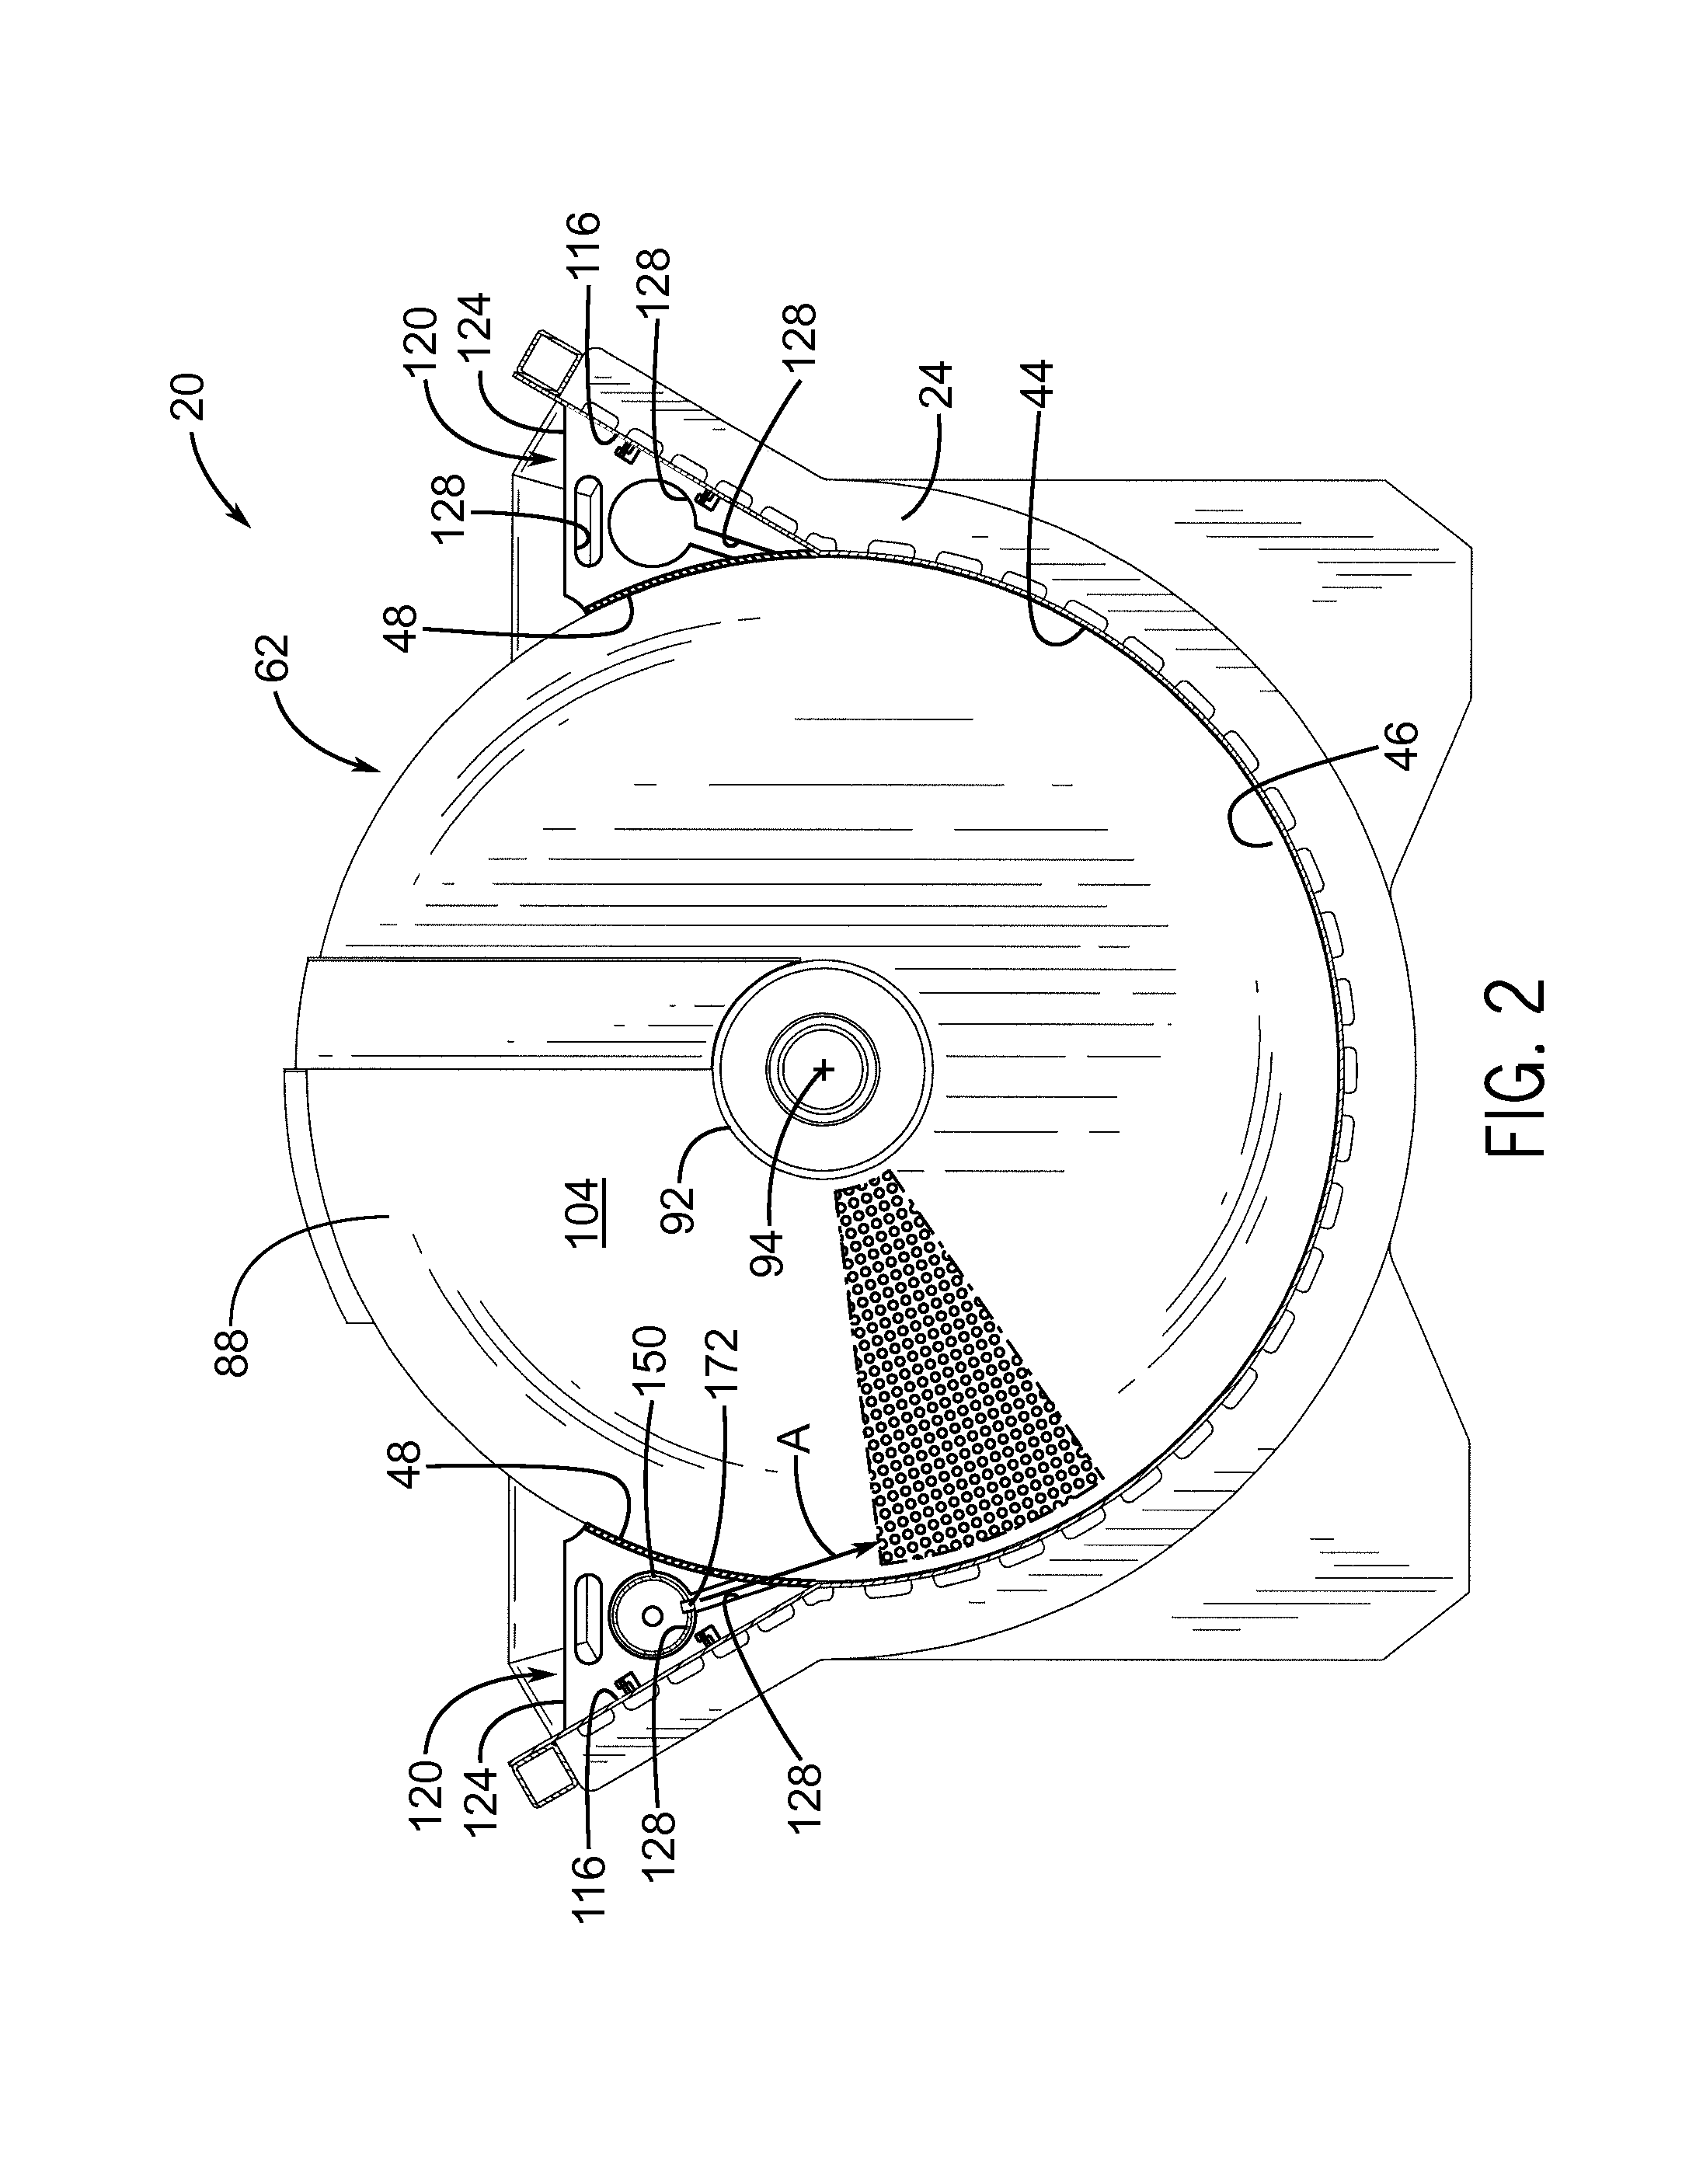 Rotary screw blancher with fluid passage and fluid agitation